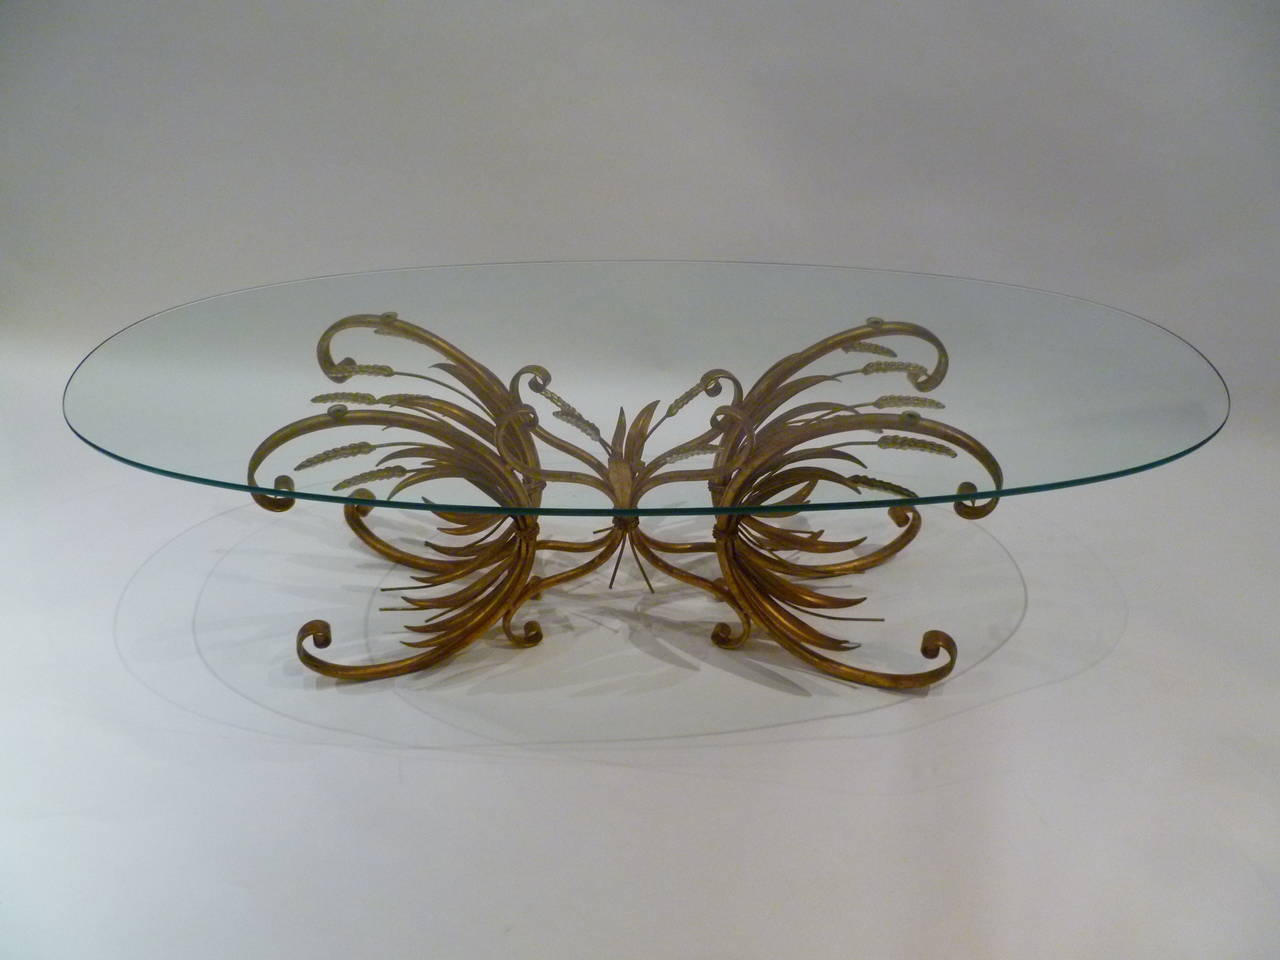 SOLD Rare and unexpected elongated Coco Chanel style double sheaf of wheat cocktail or coffee table. Presently with an oval glass. Beautifully gilt, wrought and sculpted C-scrolls, leaves.

For trade pricing and shipping please contact